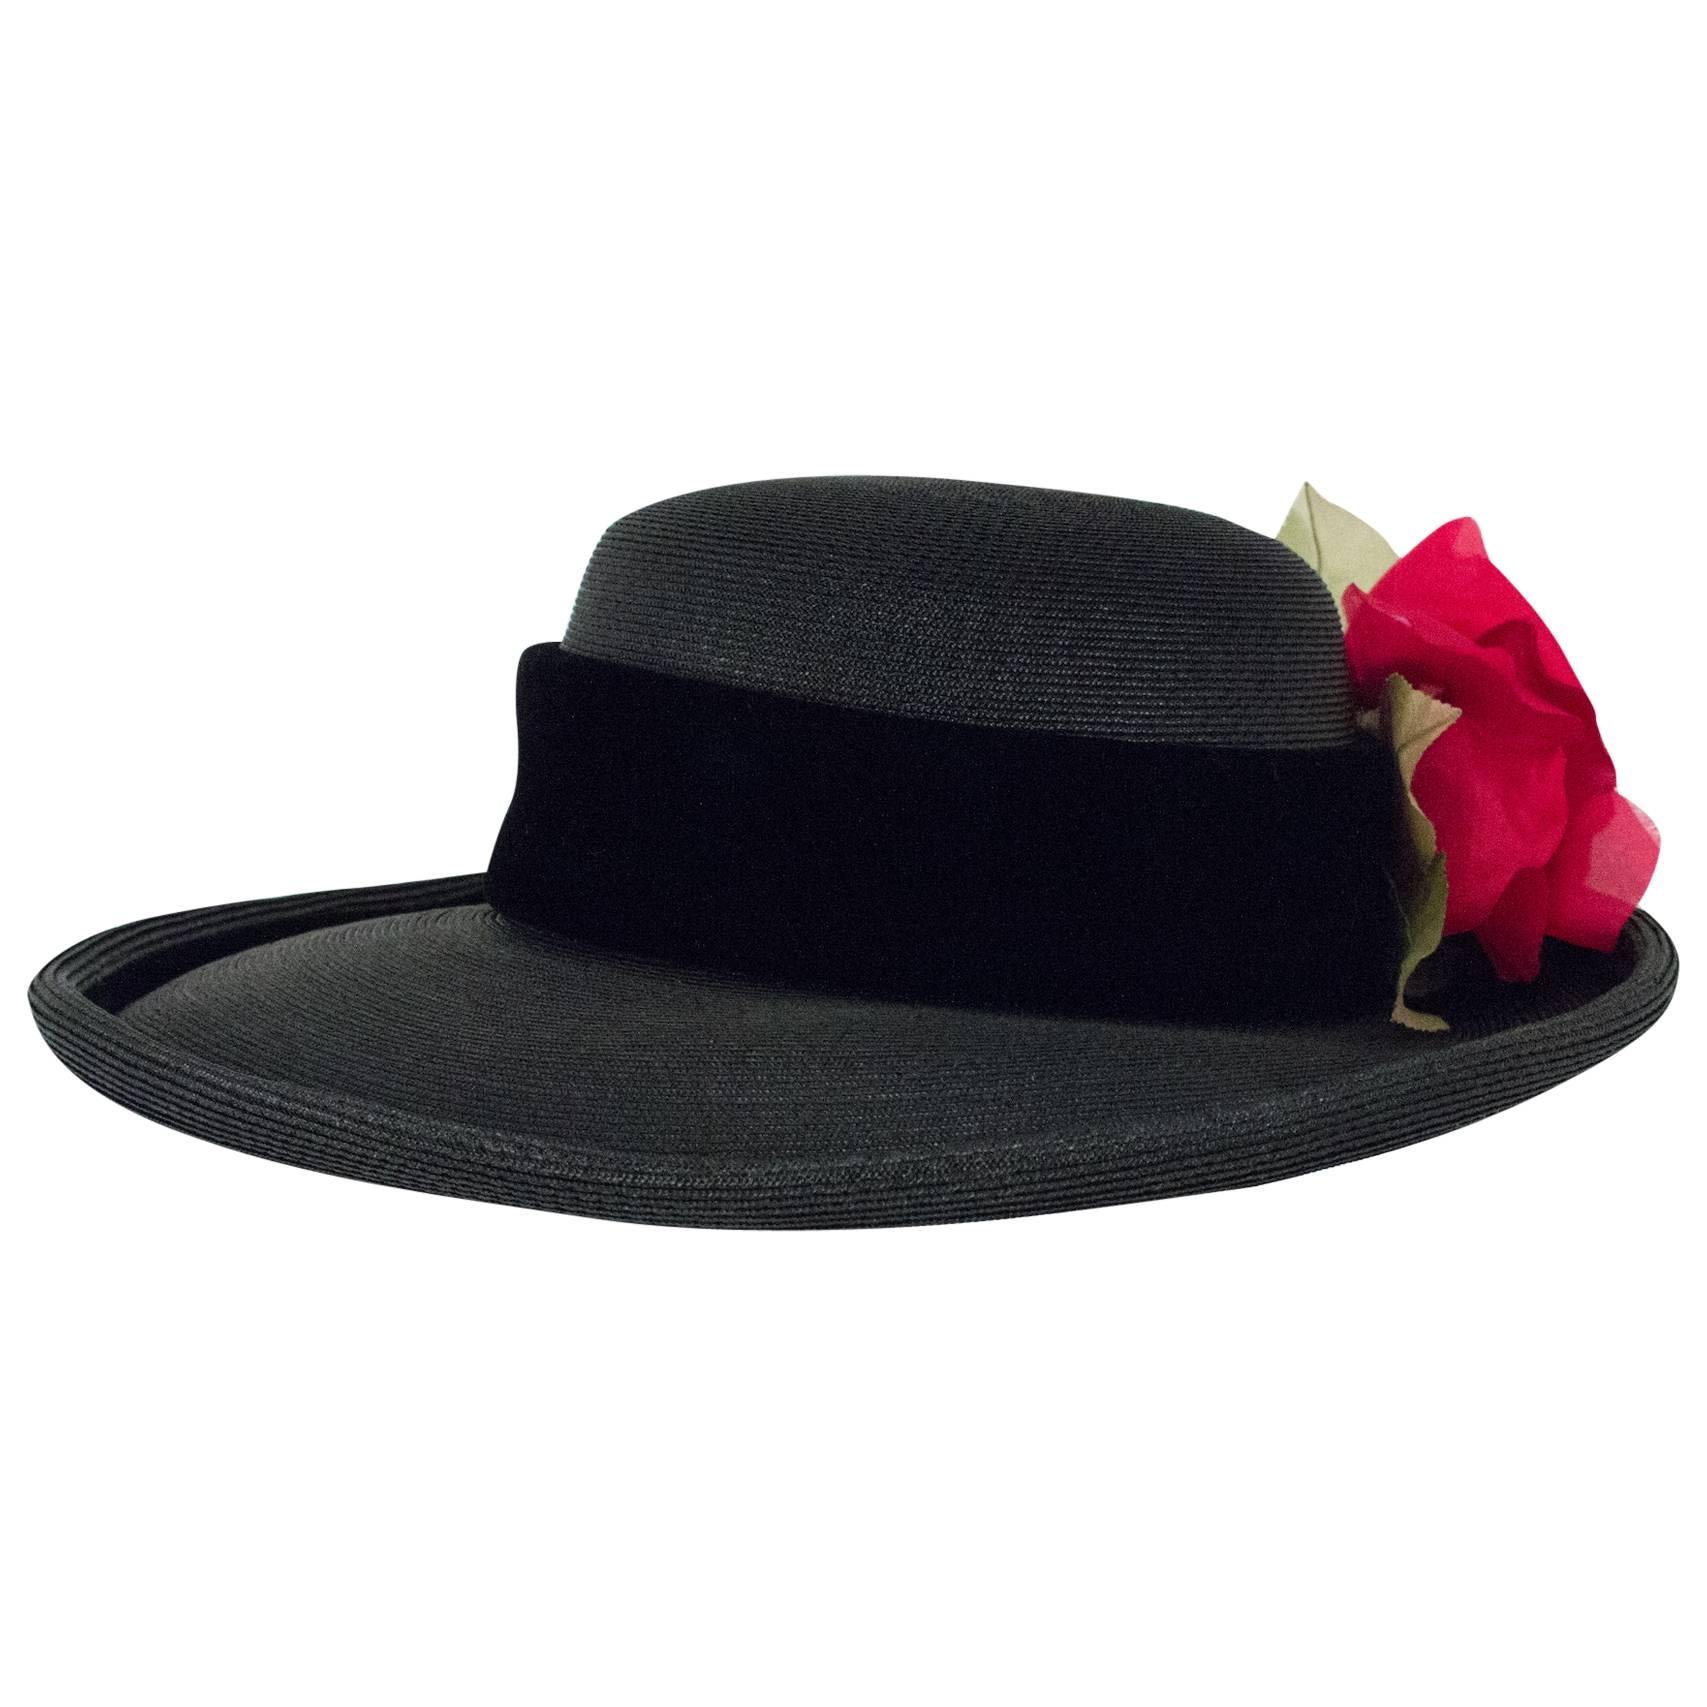 80s Christian Dior Black Straw Wide Brim Hat with Velvet Trim and Red Rose